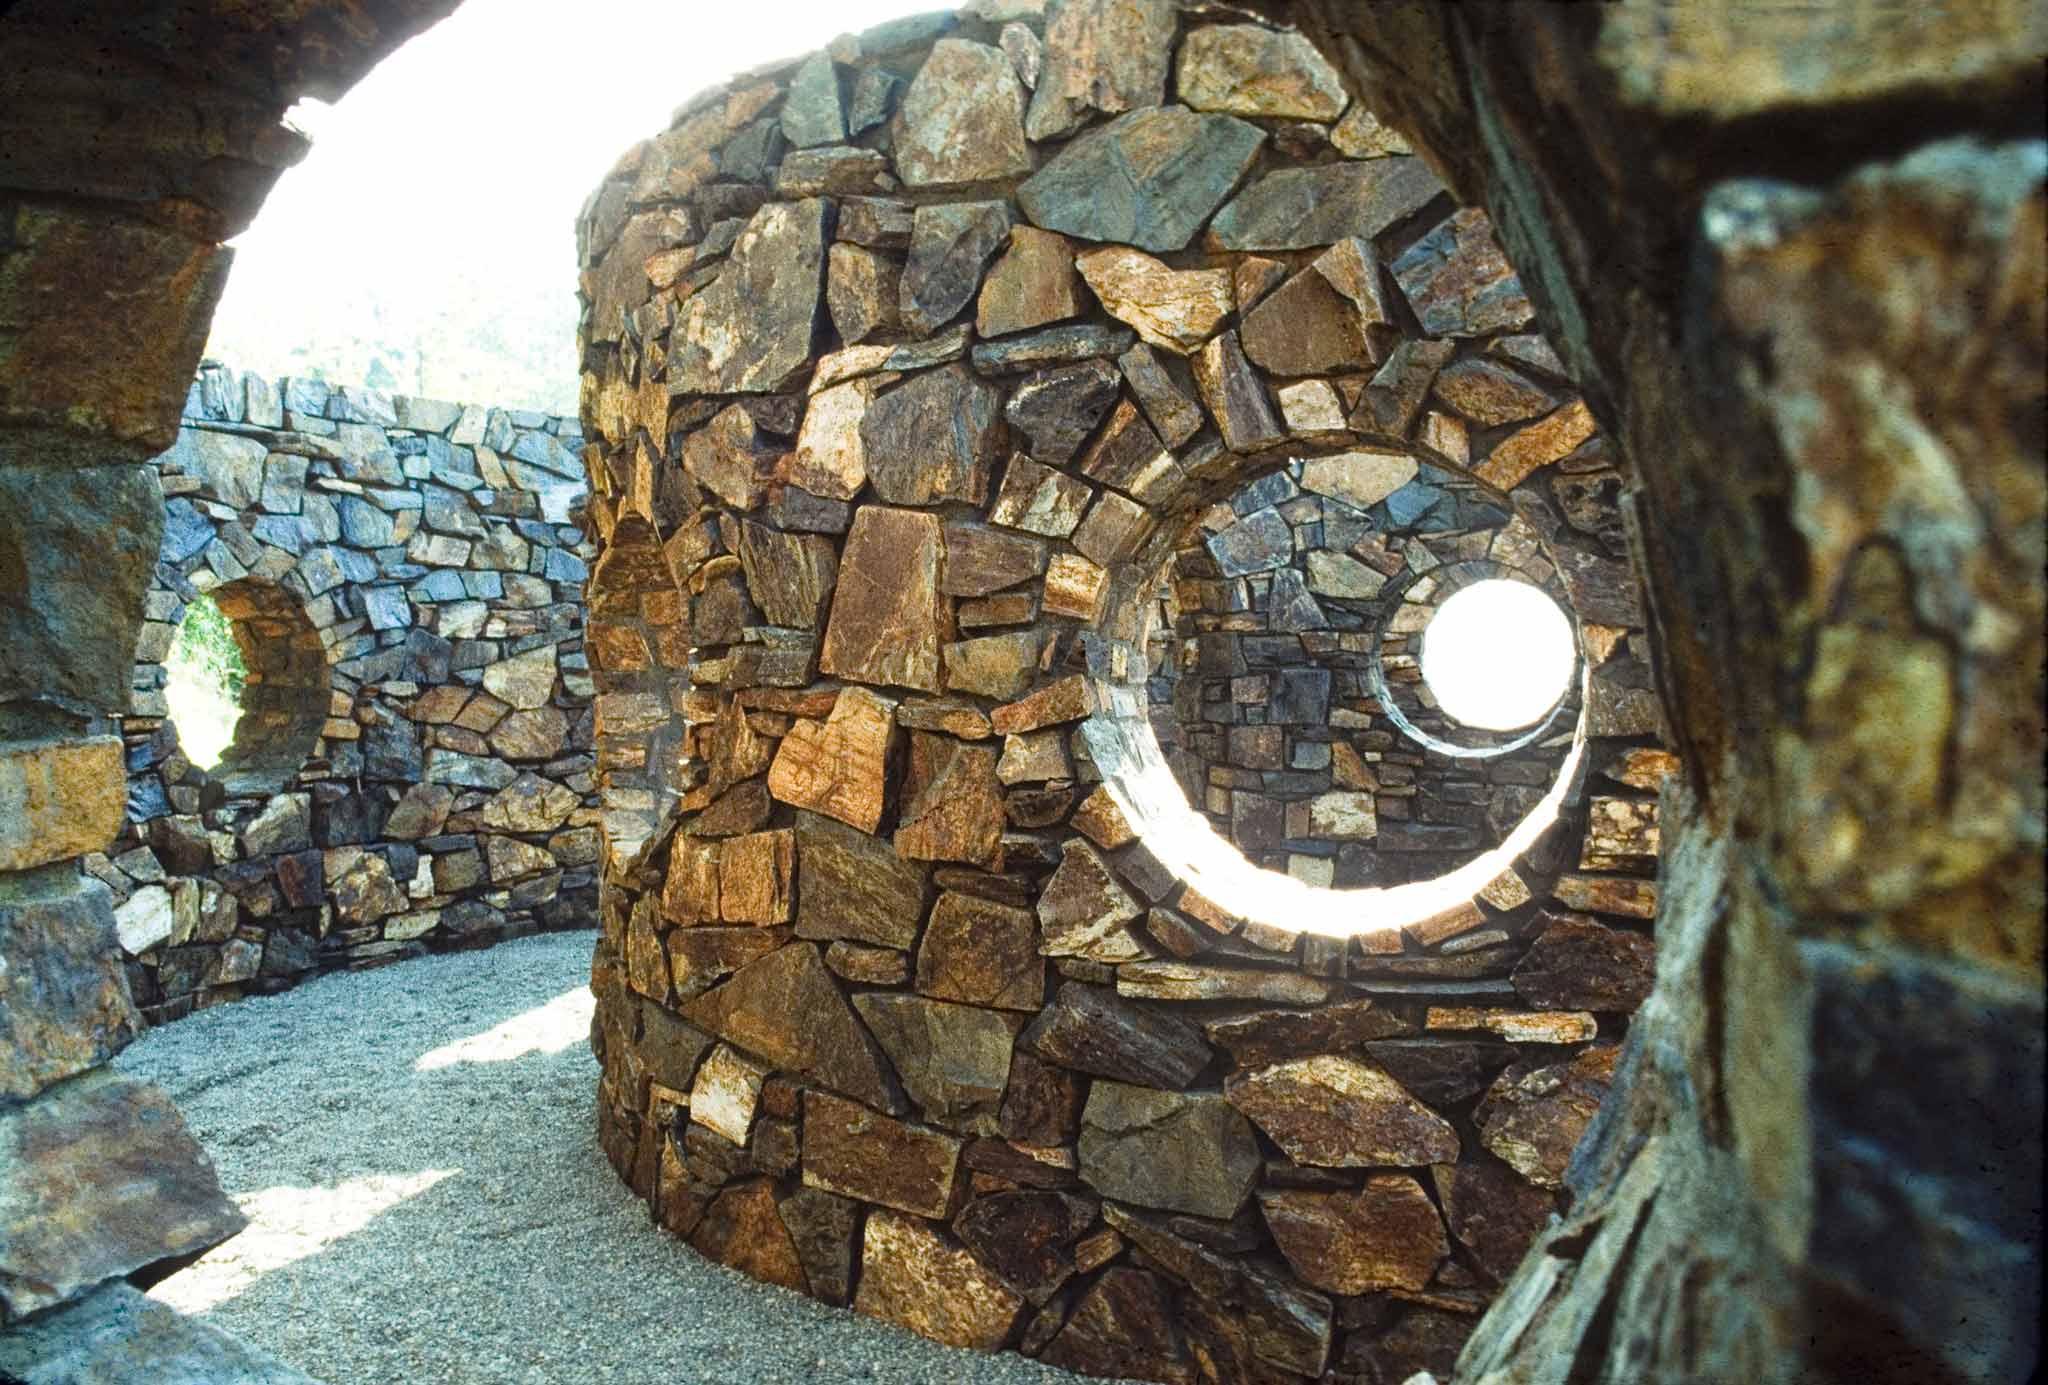 Looking through a circular opening at another curved stone wall with another circular opening in it.